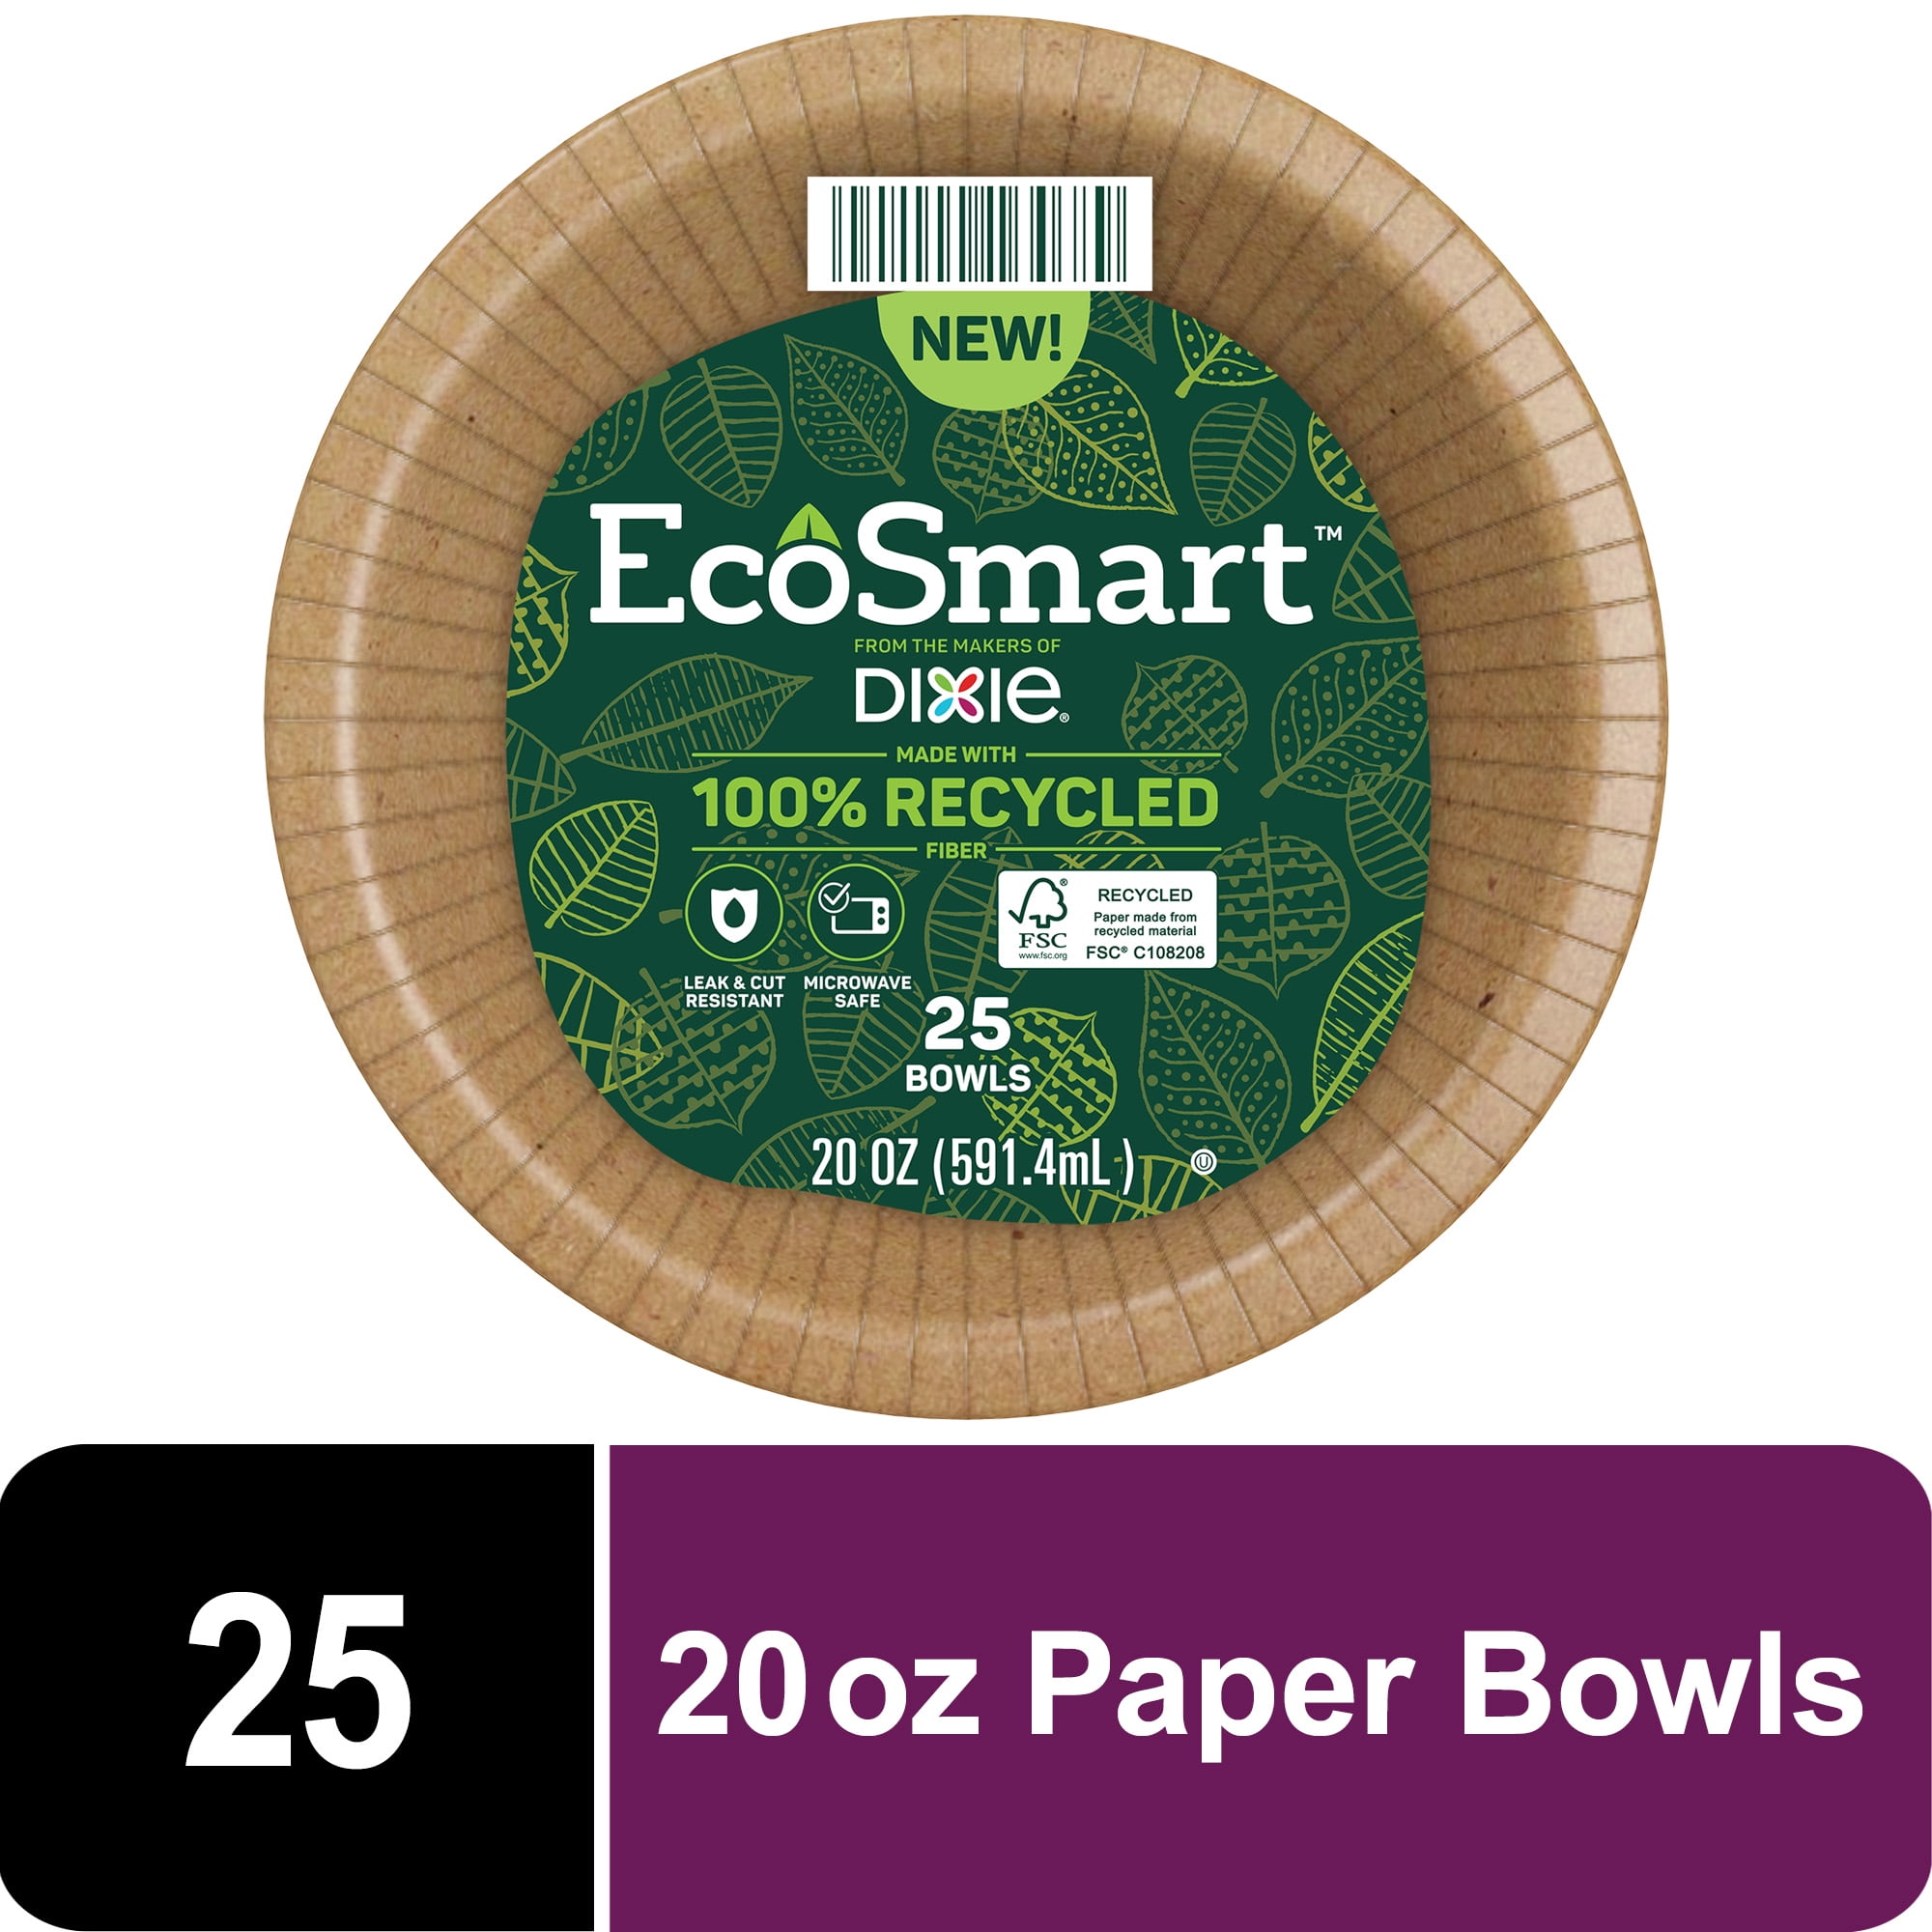 Everyday Paper Bowls 10 Oz Dessert or Light Lunch Size Printed Disposable Bowls 324 Count - New 9 Packs of 36 Bowls 